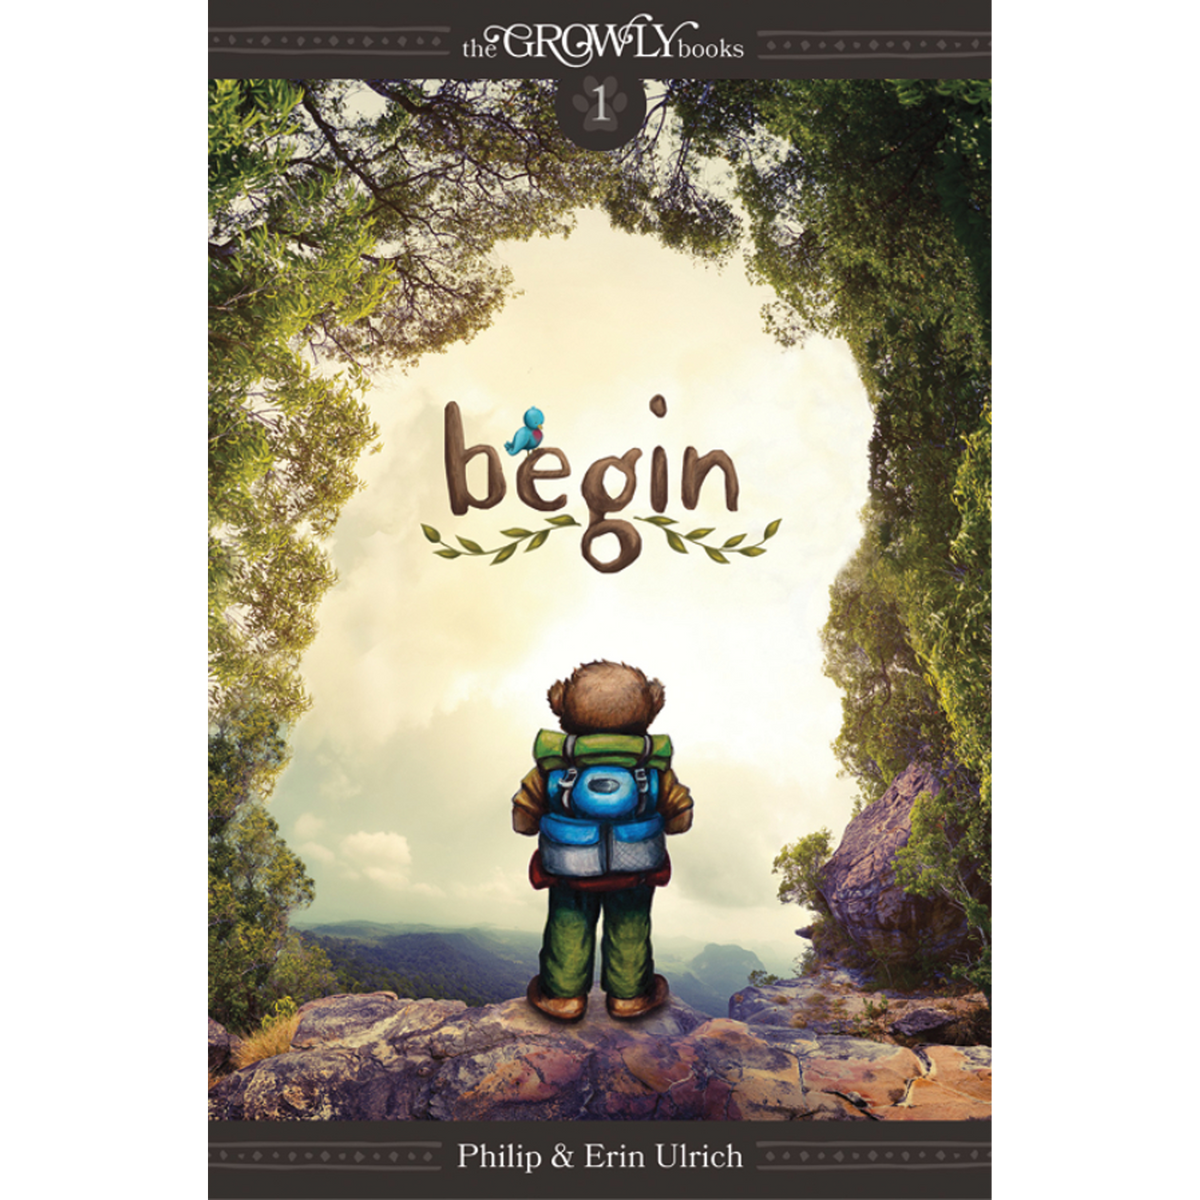 Begin (Growly Trilogy #1) – The Growly Books